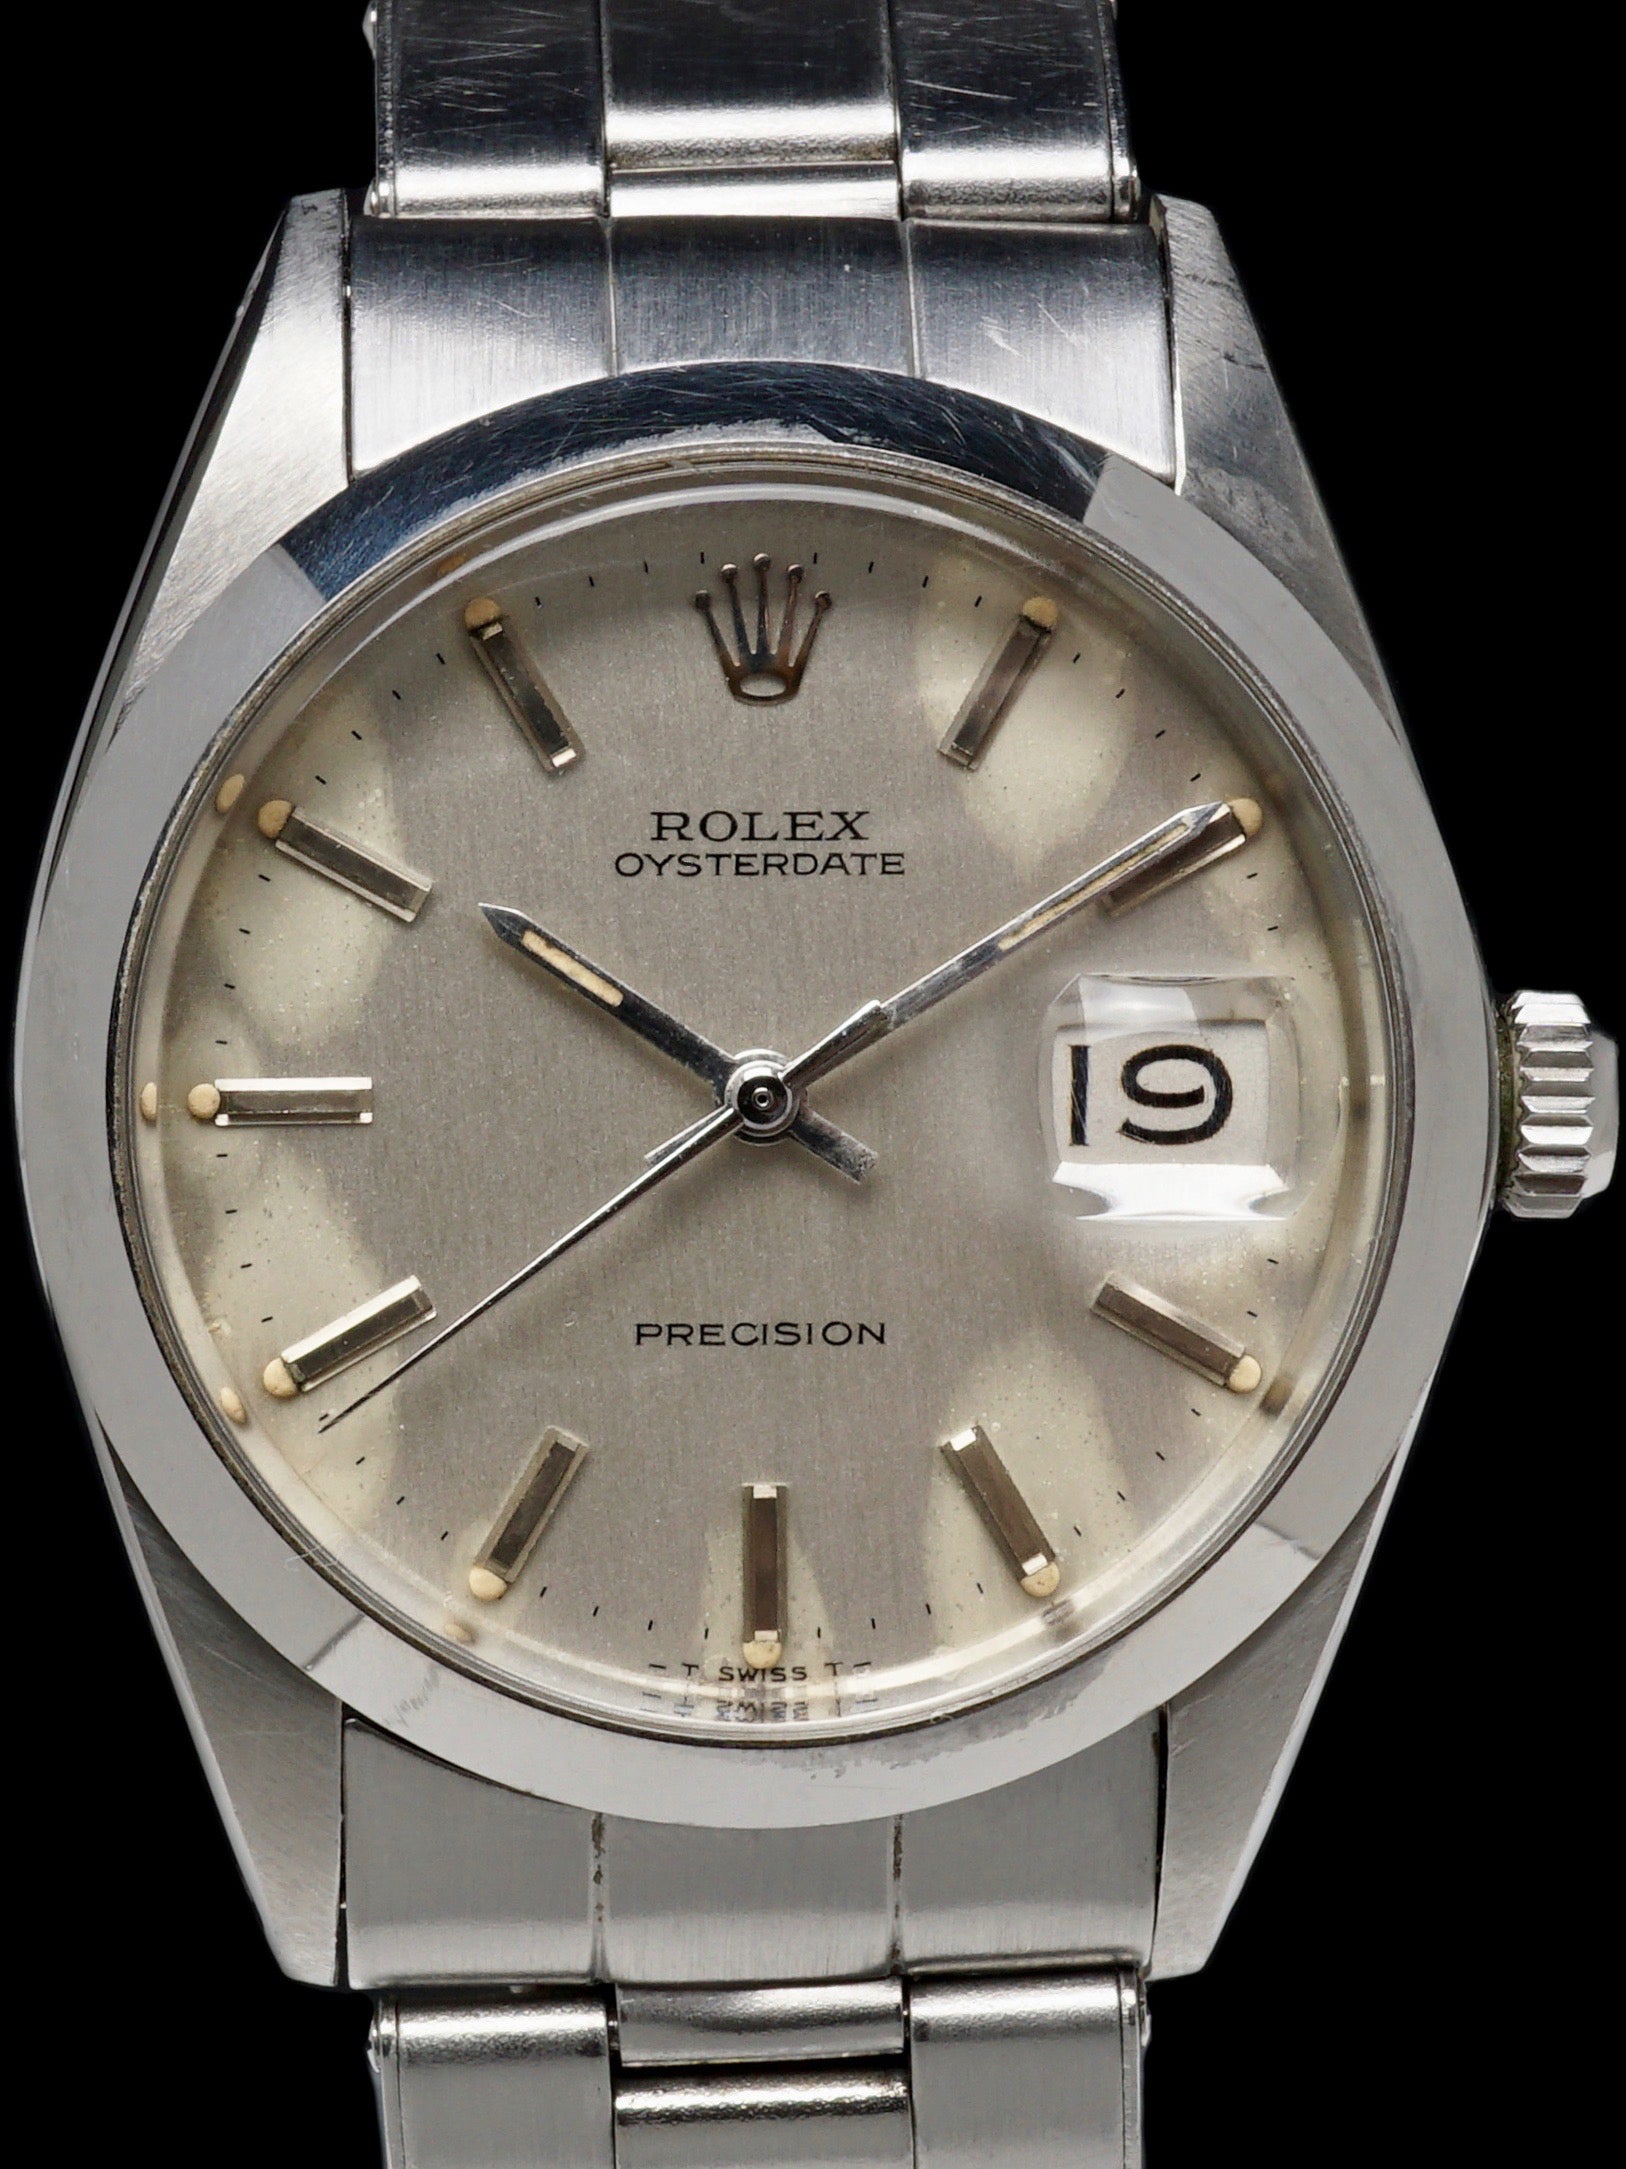 1969 Rolex Oysterdate Precision (Ref. 6694) With Box and Military Provenance